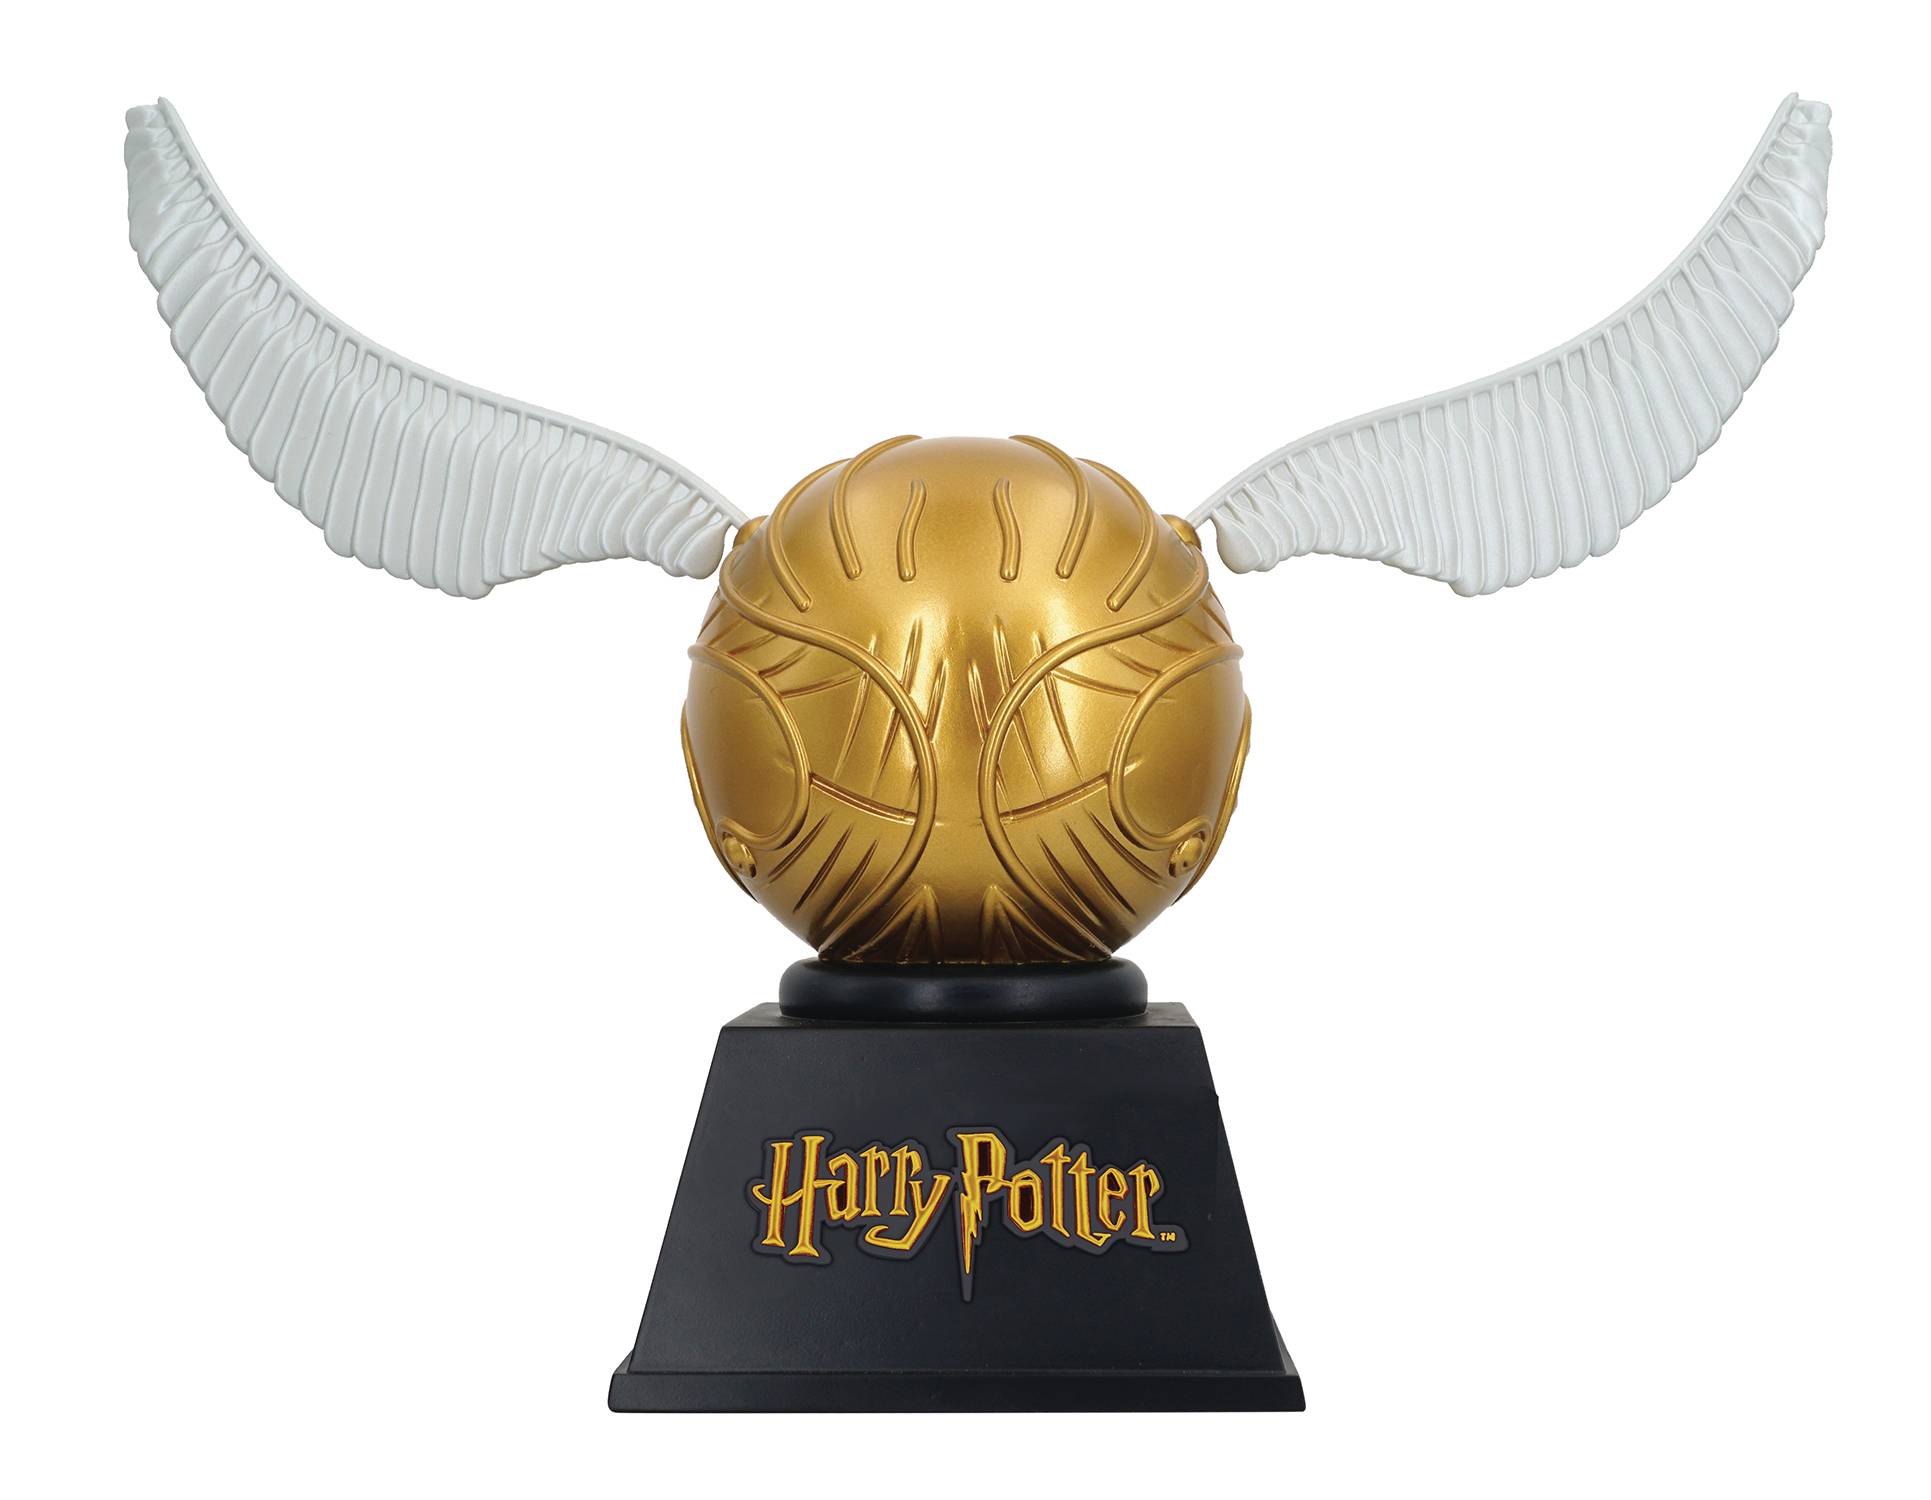 Harry Potter Golden Snitch PVC Figural Coin Bank